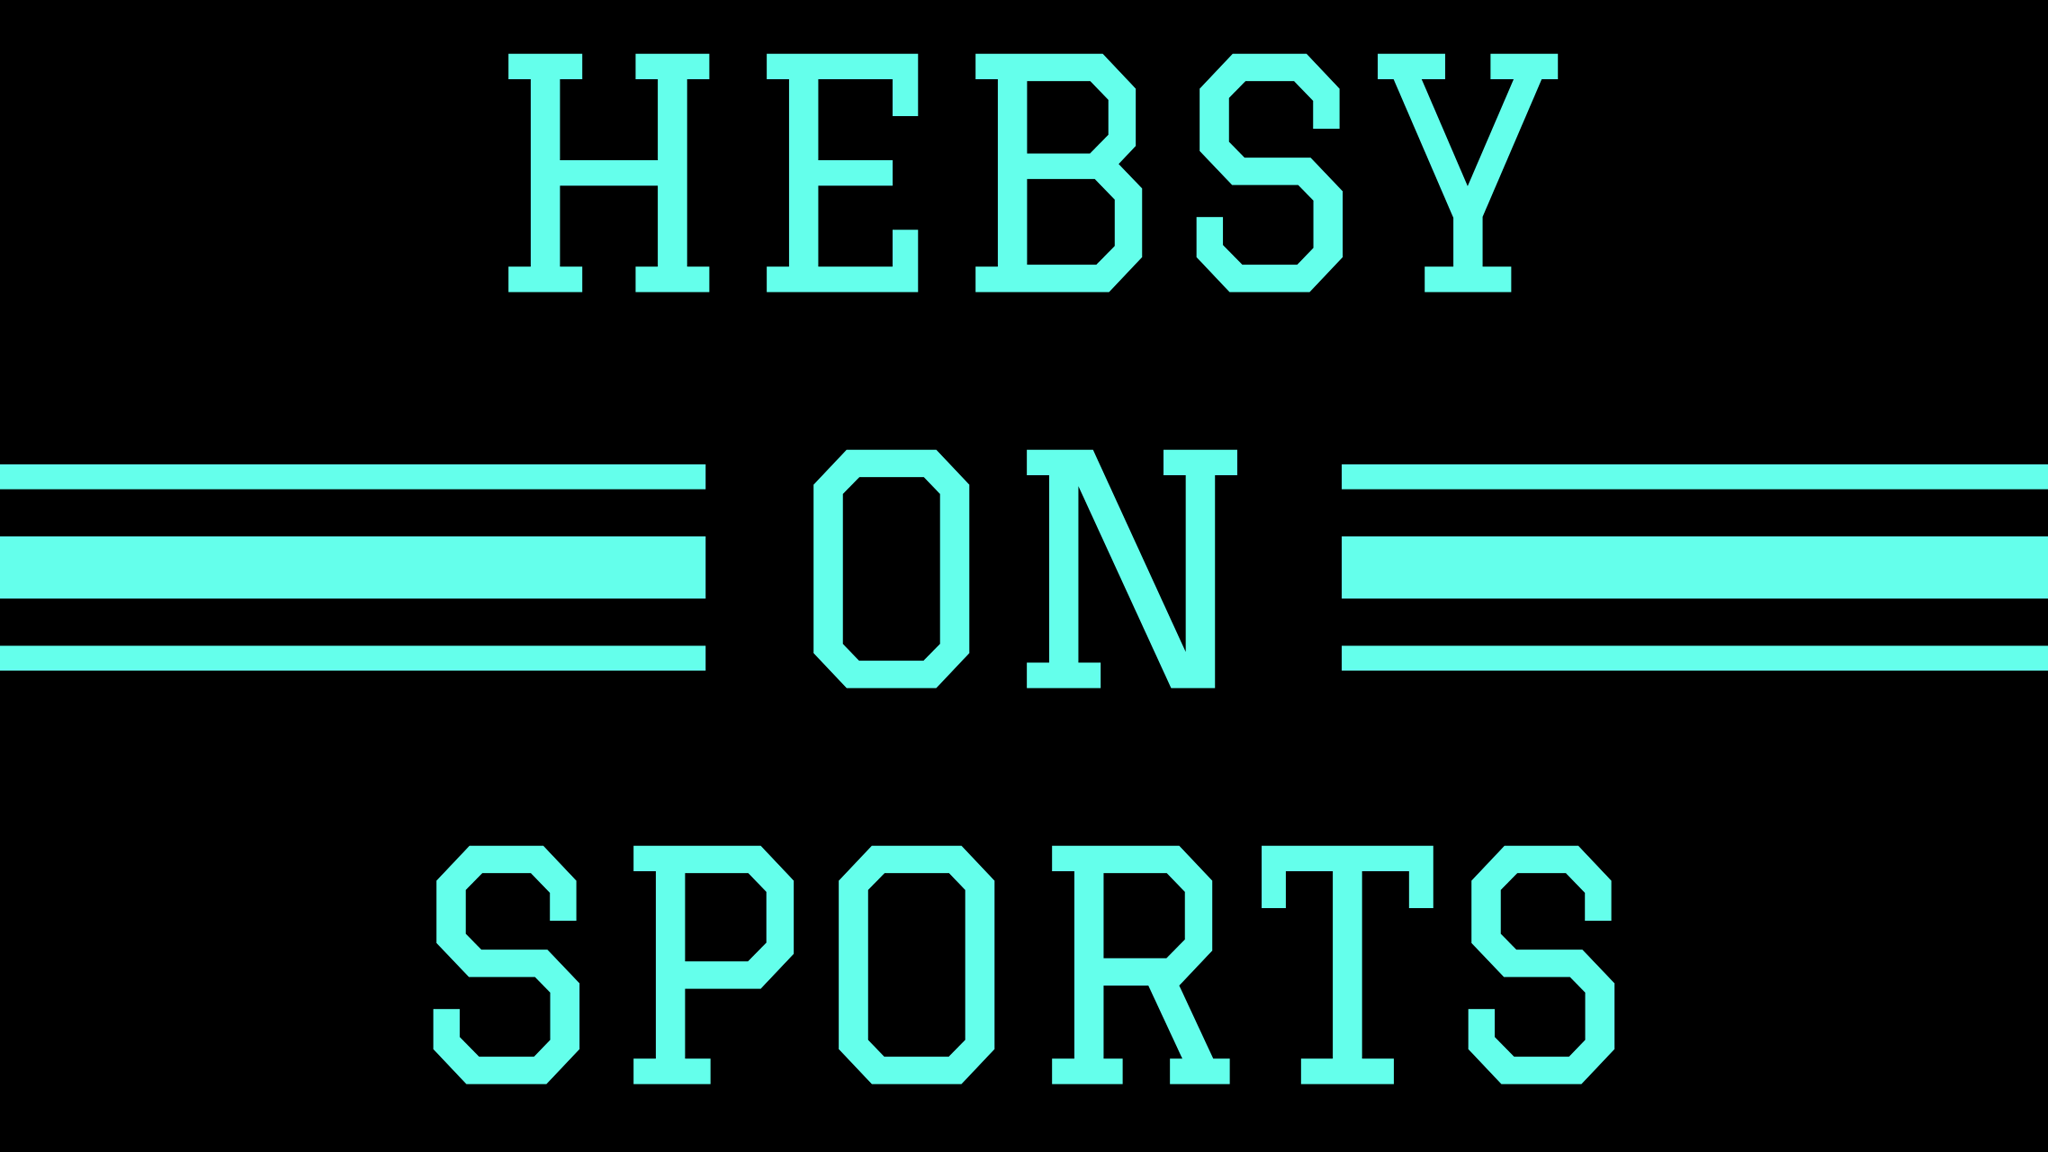 Hebsy on Sports for July 23, 2021